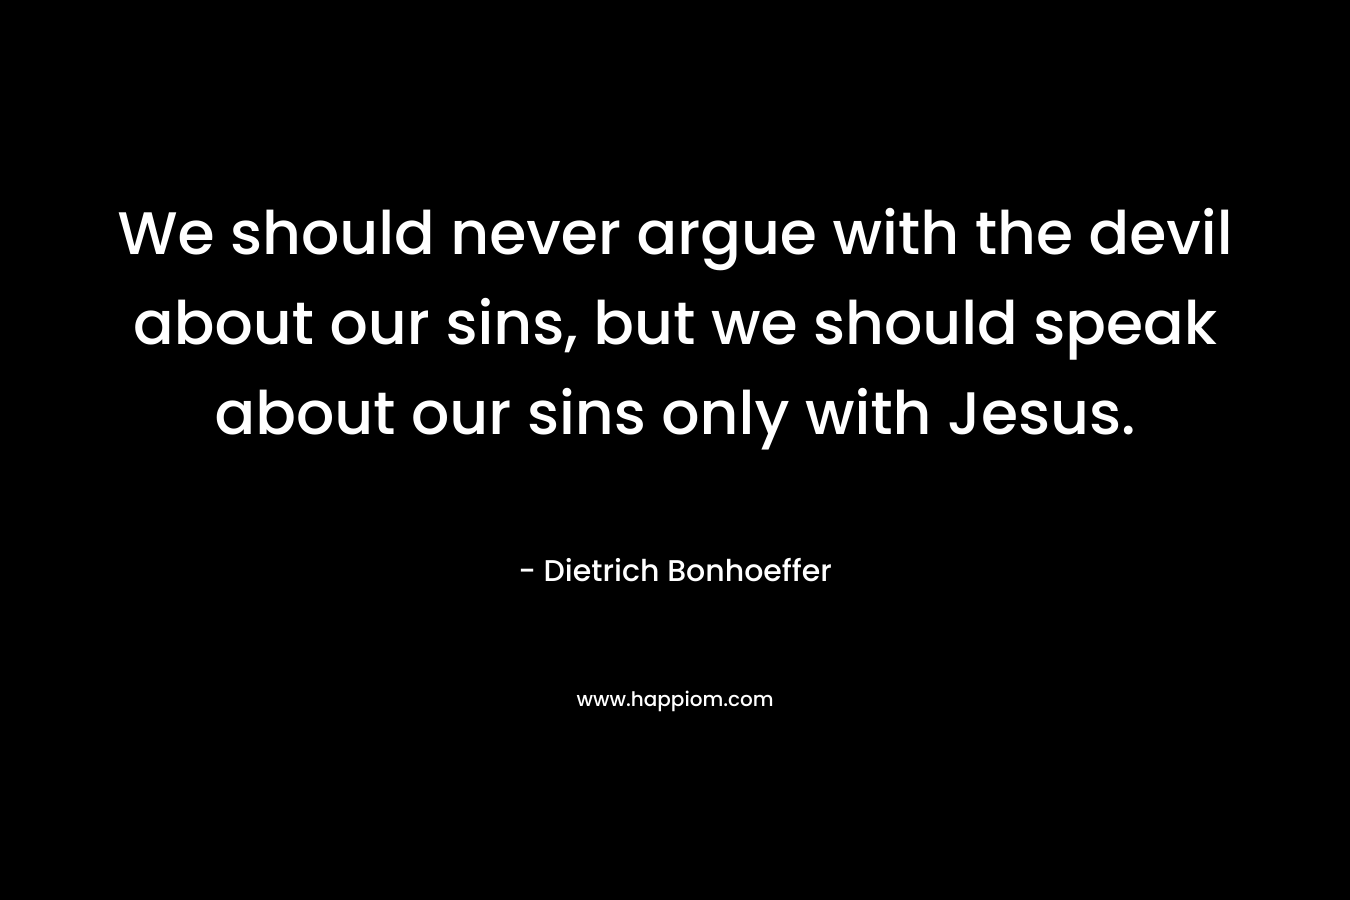 We should never argue with the devil about our sins, but we should speak about our sins only with Jesus.